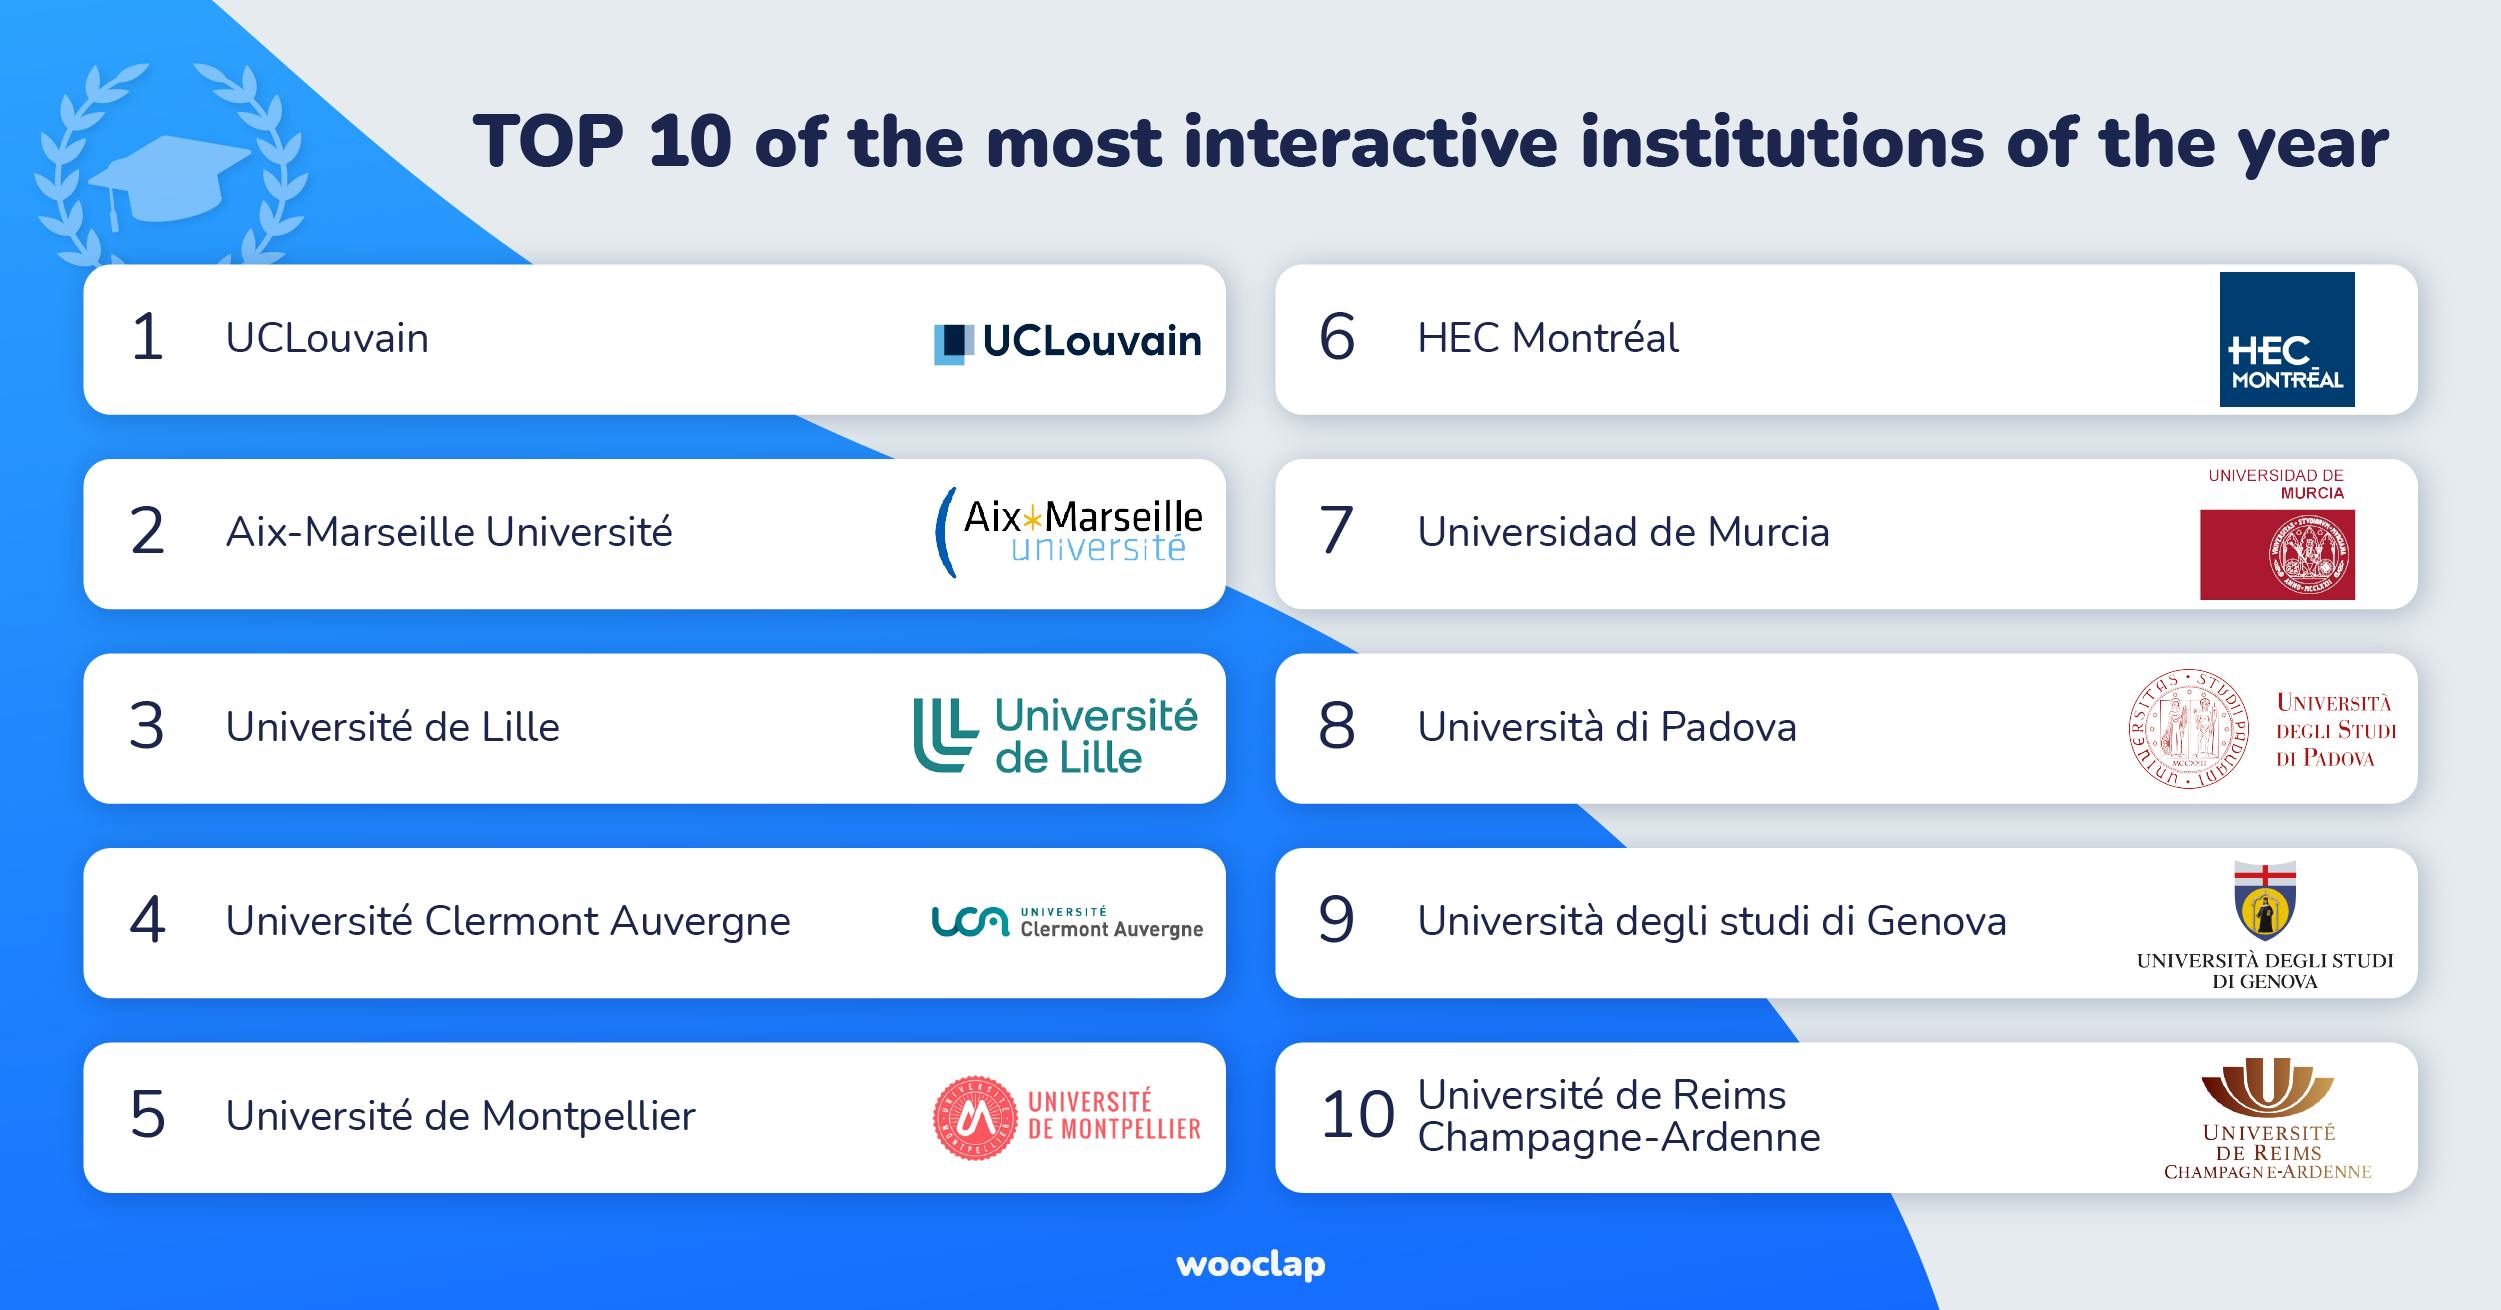 Most interactive institutions of the year